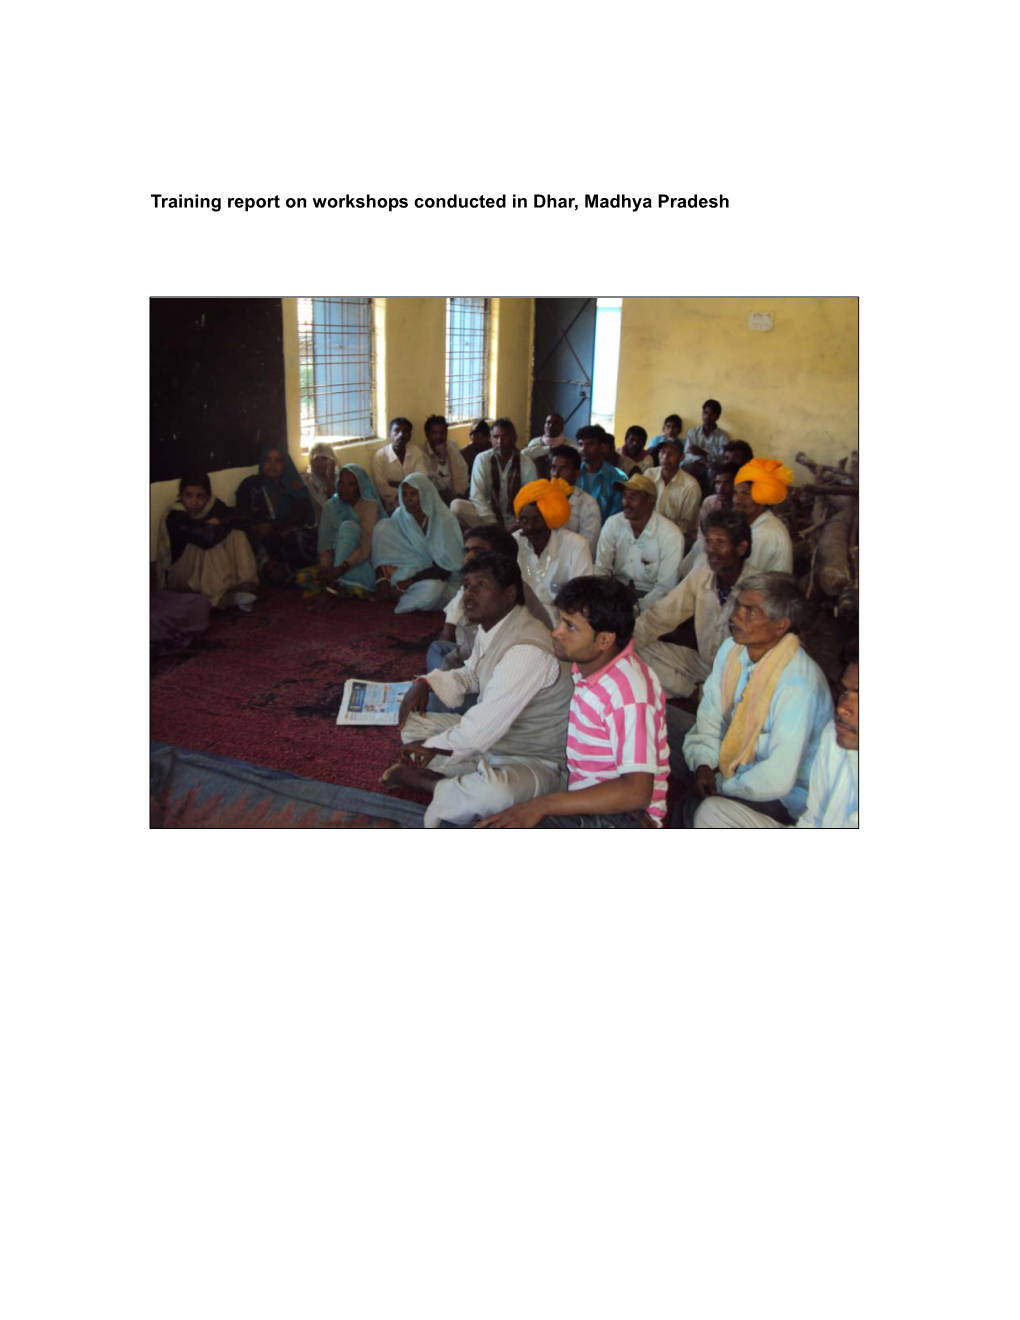 Training Report on Workshops Conducted in Dhar, Madhya Pradesh